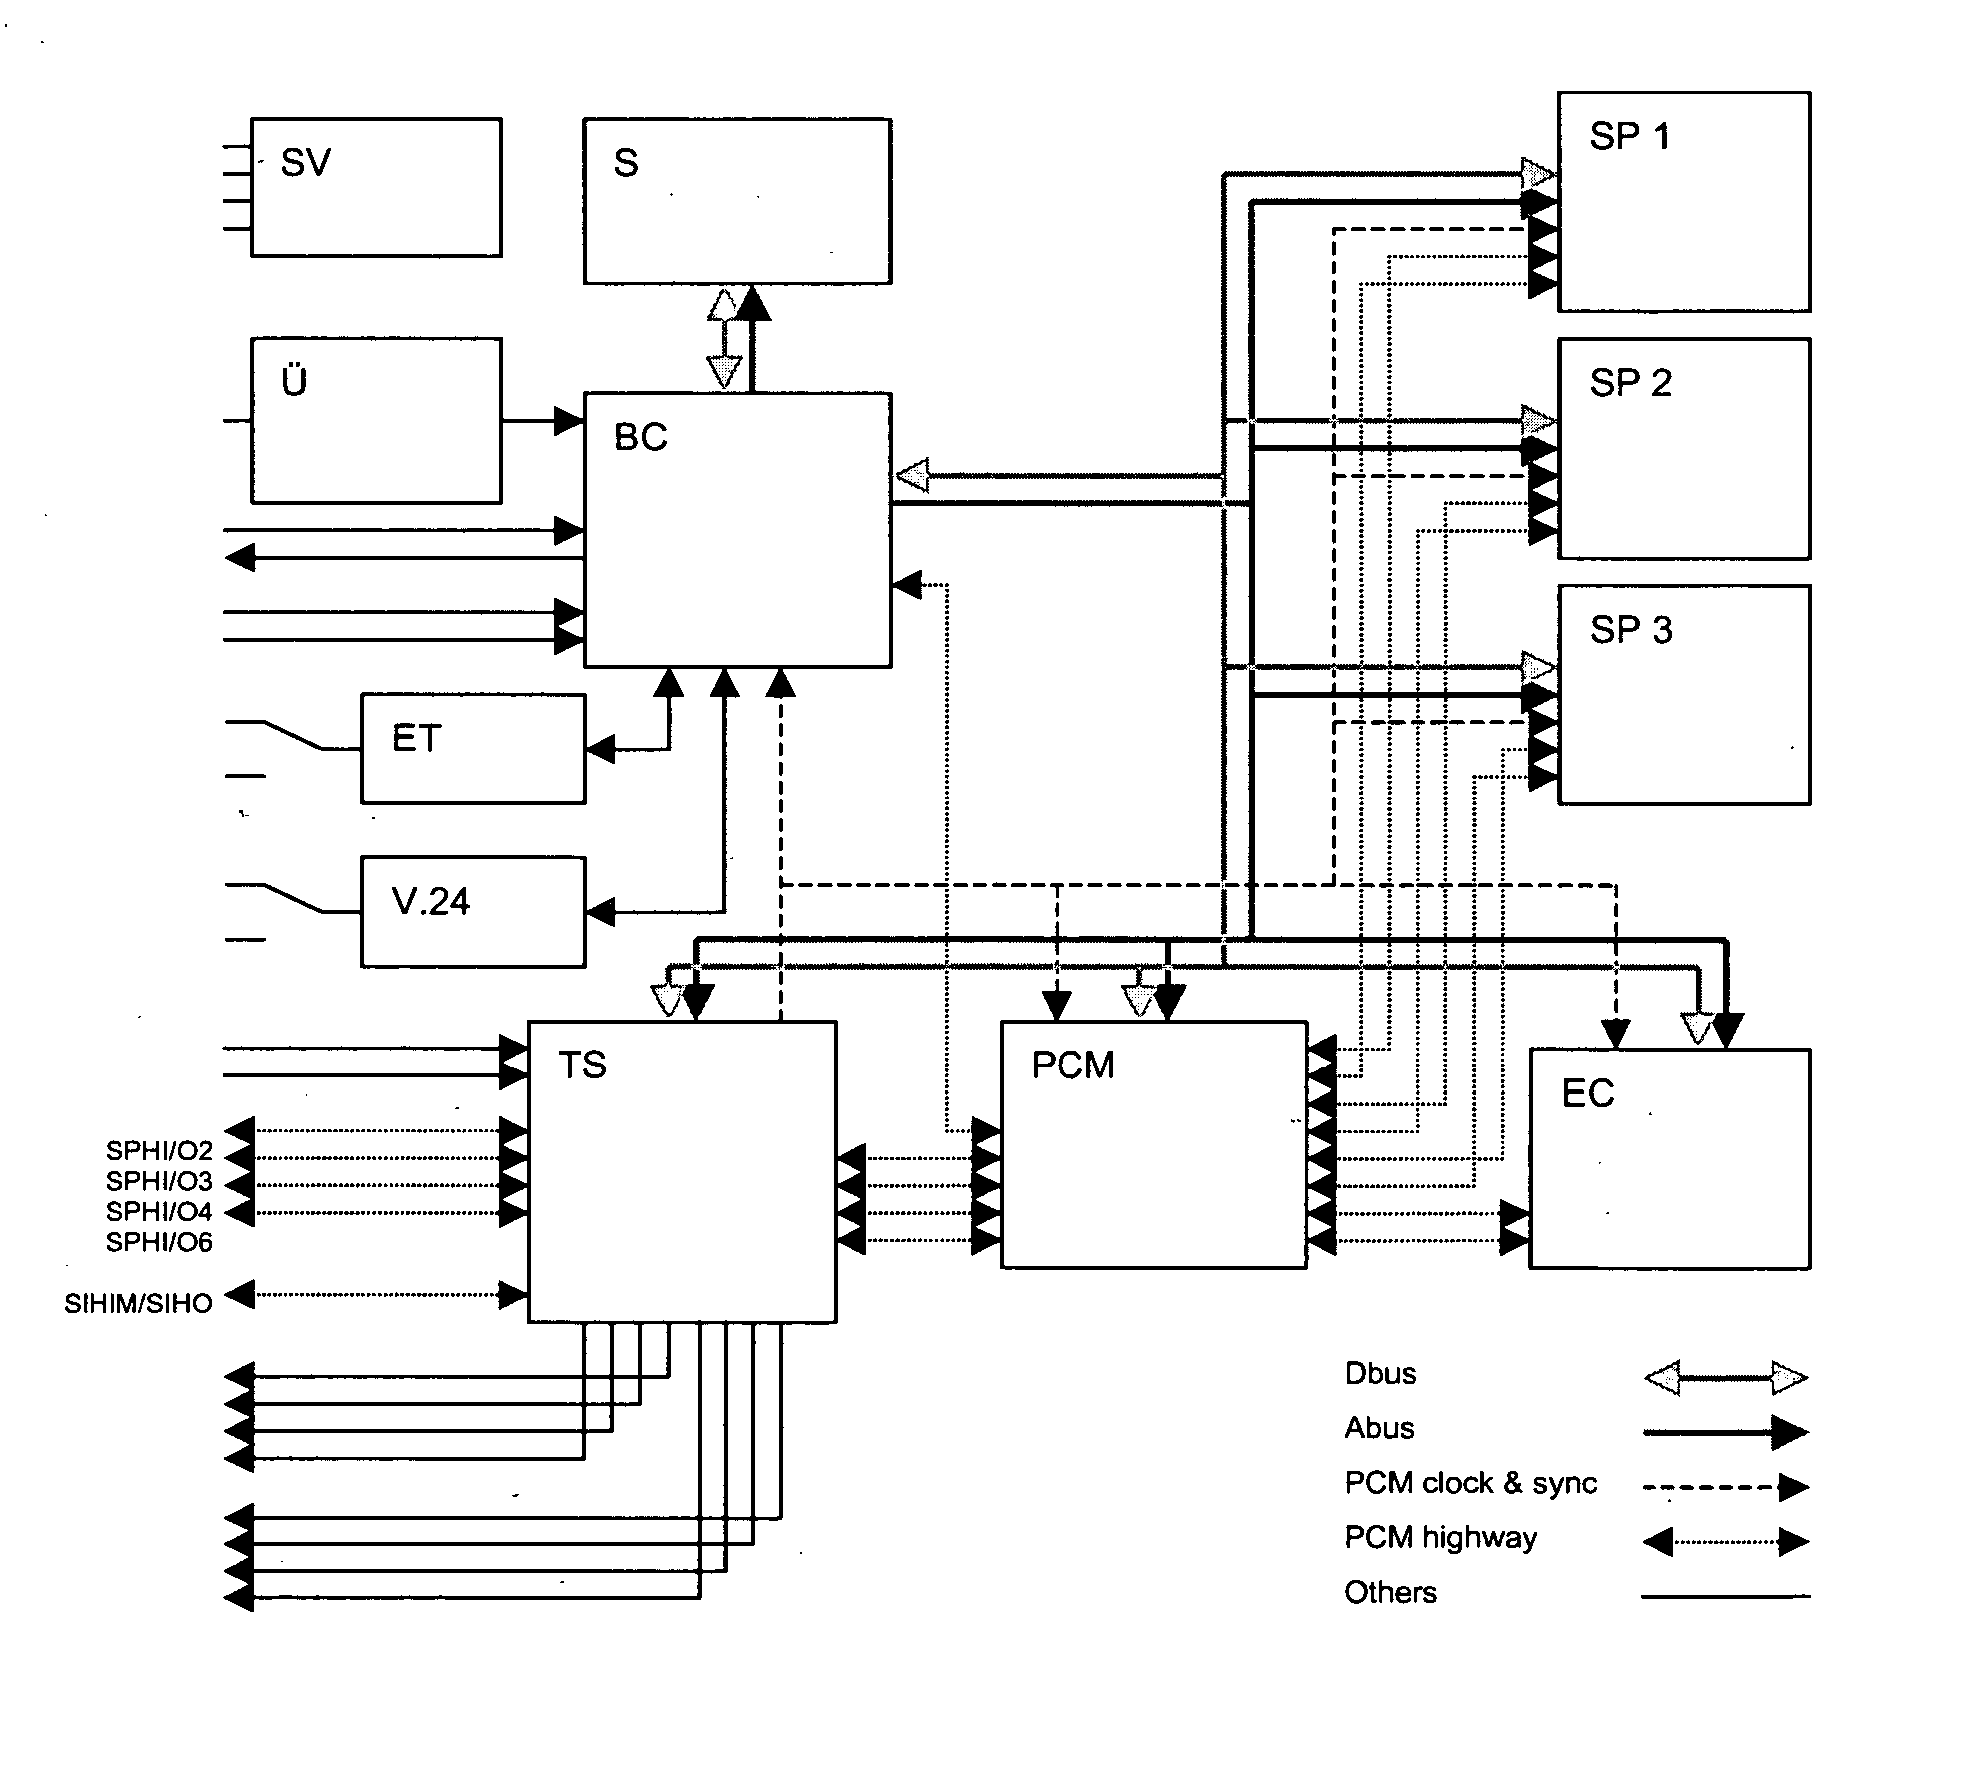 Signal processing unit with serial time multiplex connections between signal processing and control means